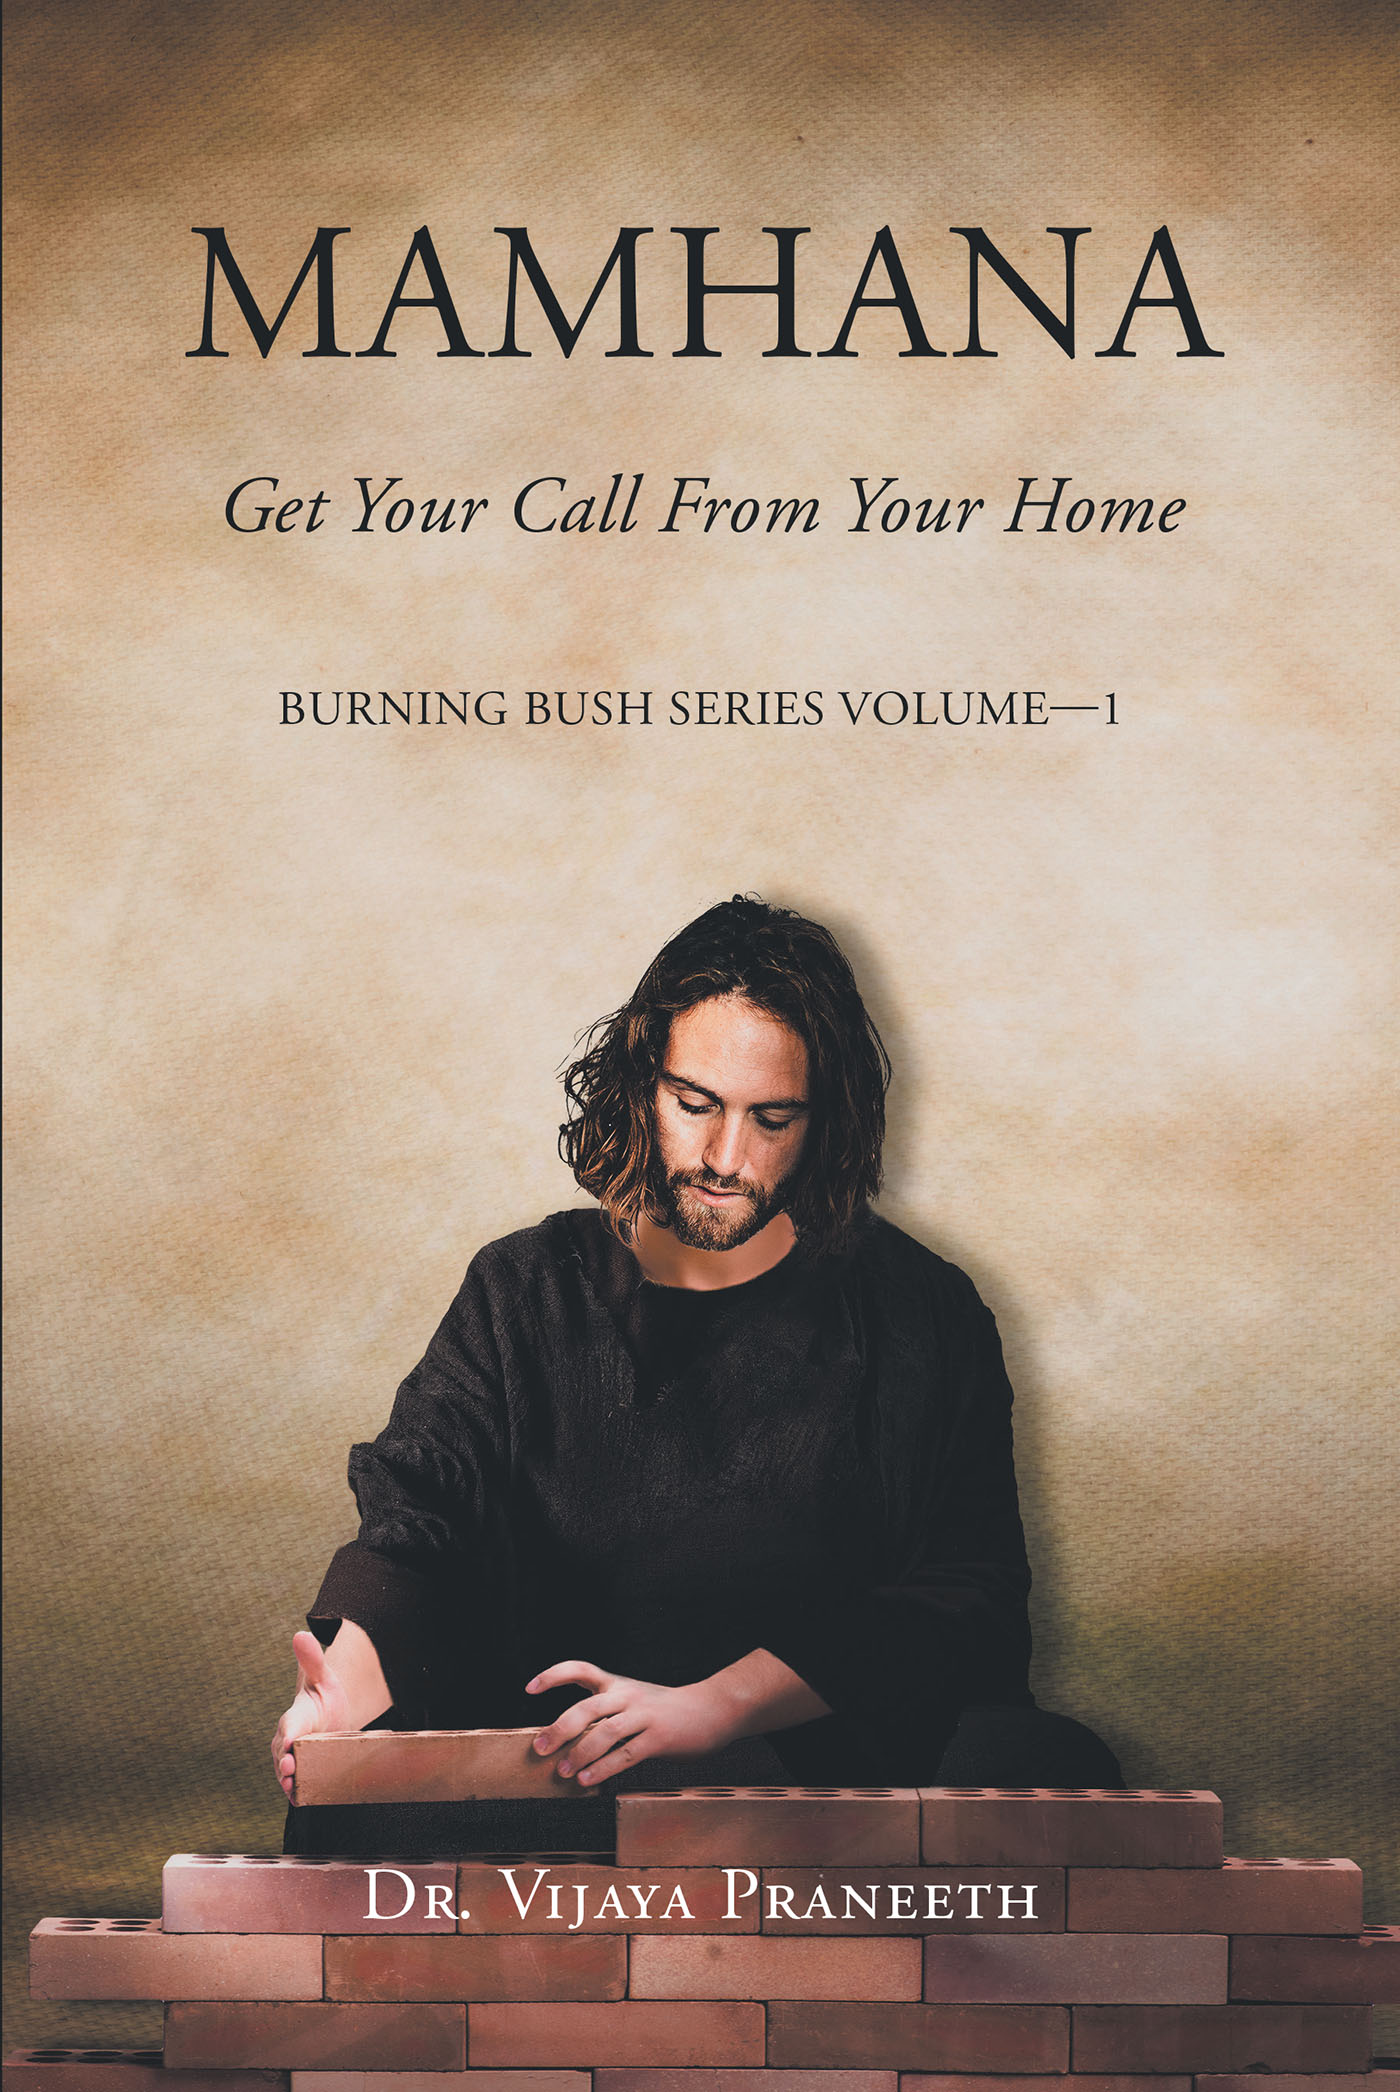 Dr. Vijaya Praneeth’s Newly Released “MAMHANA: Get Your Call From Your Home” is an Empowering Guide to Finding One’s Purpose